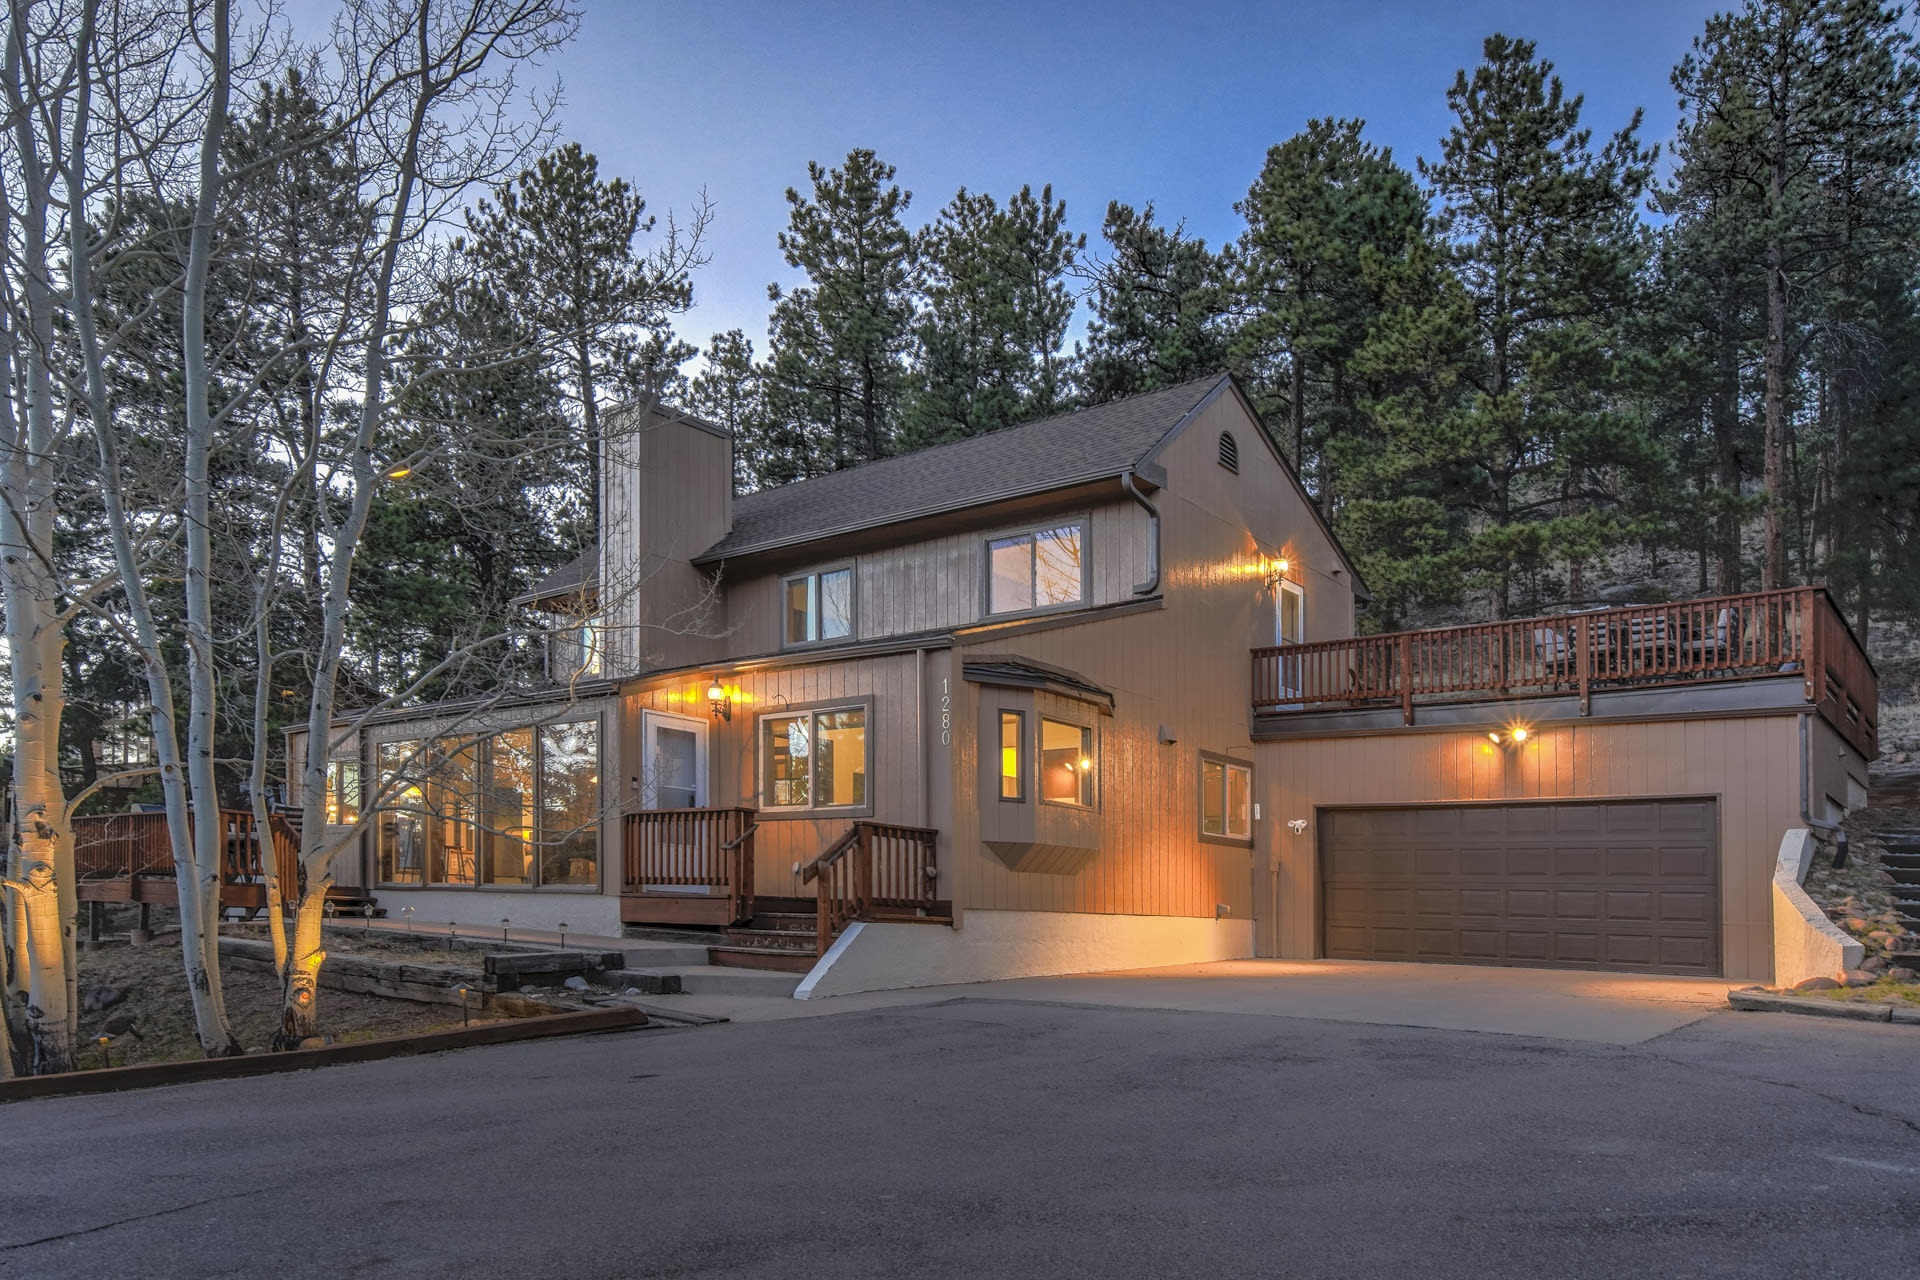 Hoste.com offers VRBO homes in Colorado at the best prices. Enjoy privacy and comfort with outdoor spaces, kitchens, and fast internet. Our local team ensures cleanliness, security, and easy entry for peace of mind. Book now on Hoste.com.